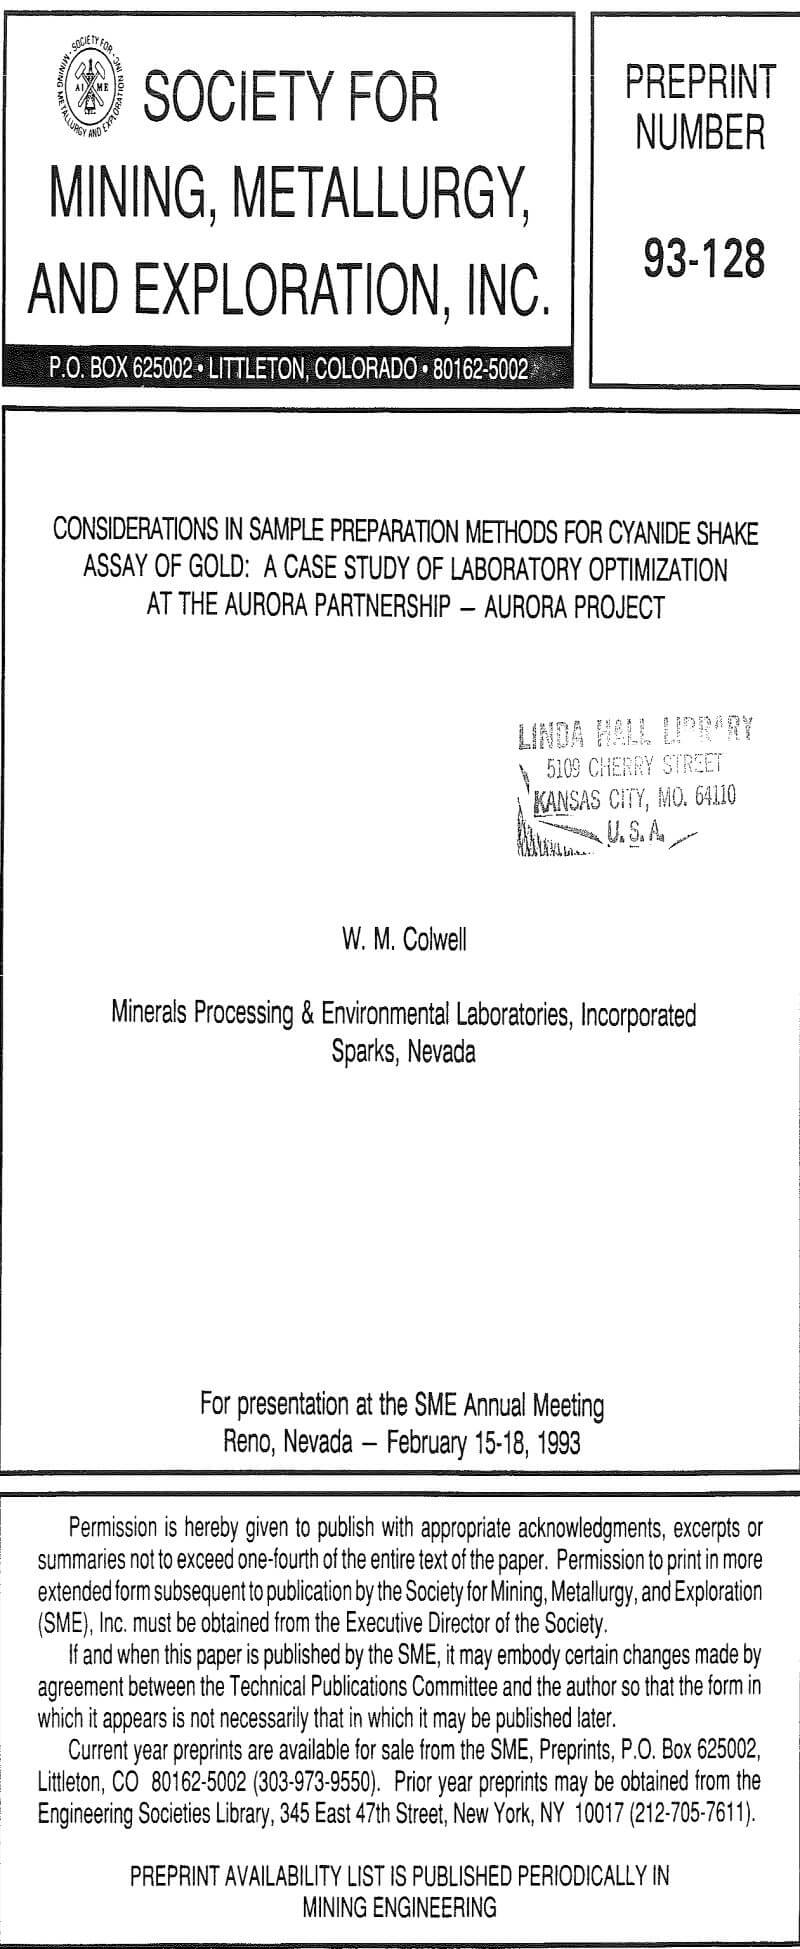 considerations in sample preparation methods for cyanide shake assay of gold a case study of laboratory optimization at the aurora partnership aurora project